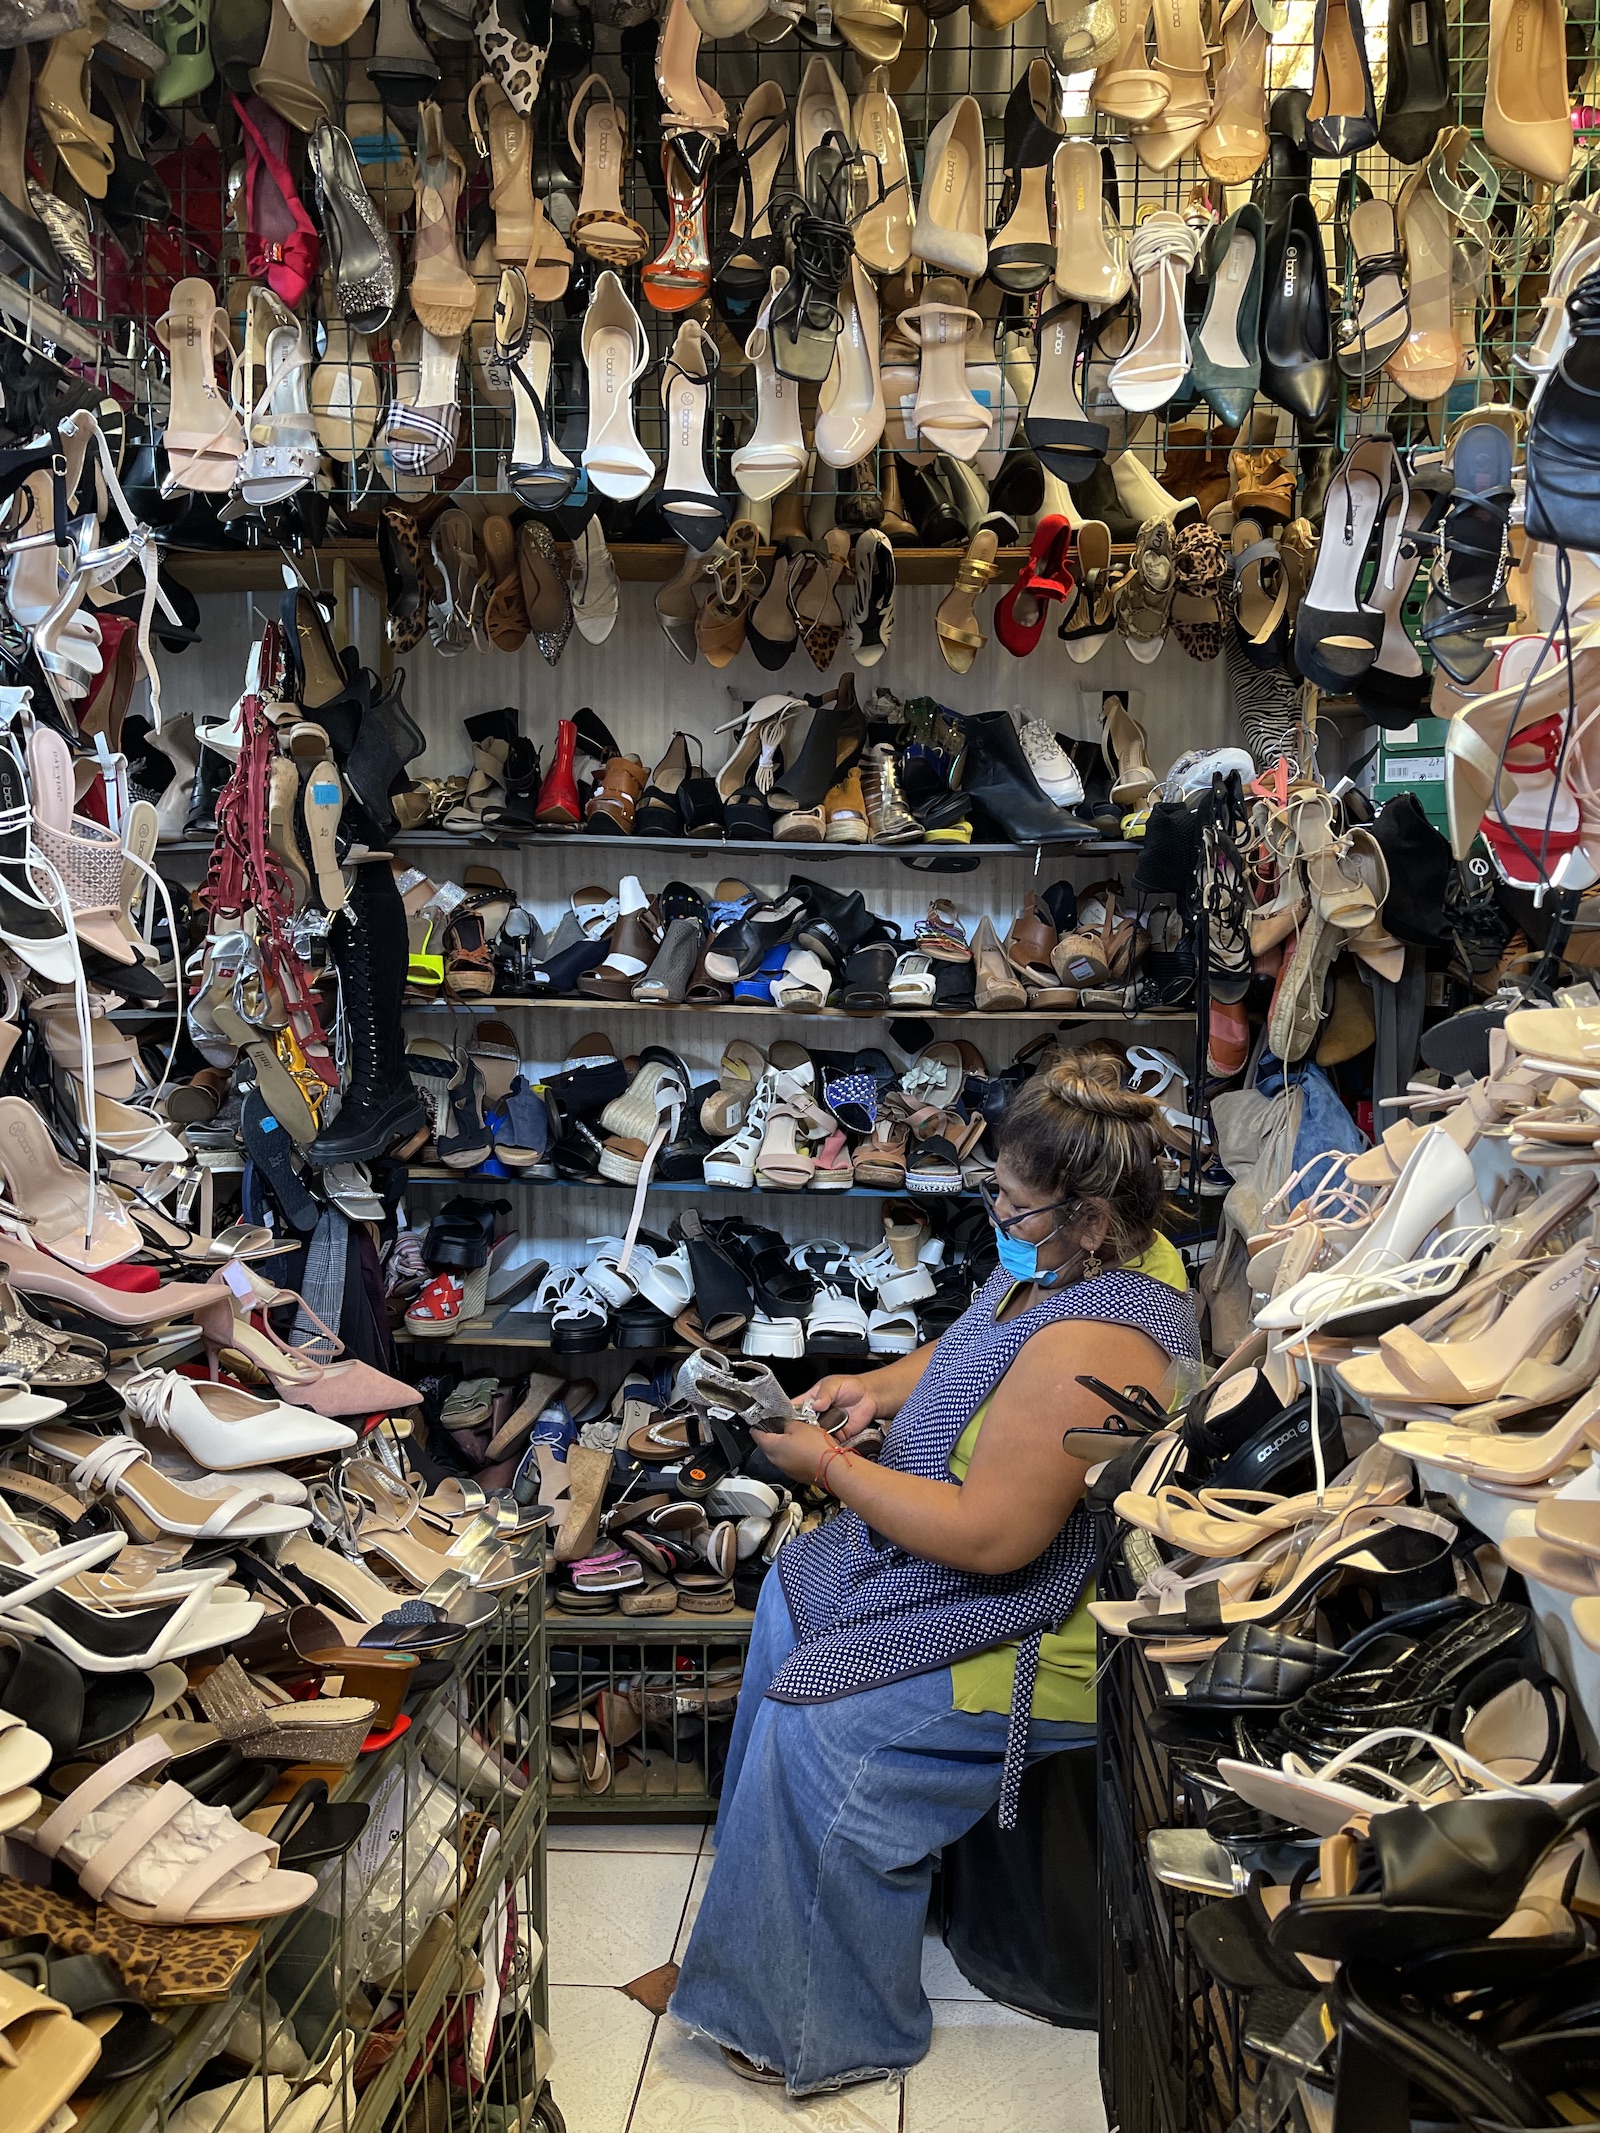 a woman looks toward a wall of used shoes lining the inside of a kiosk in an outdoor market